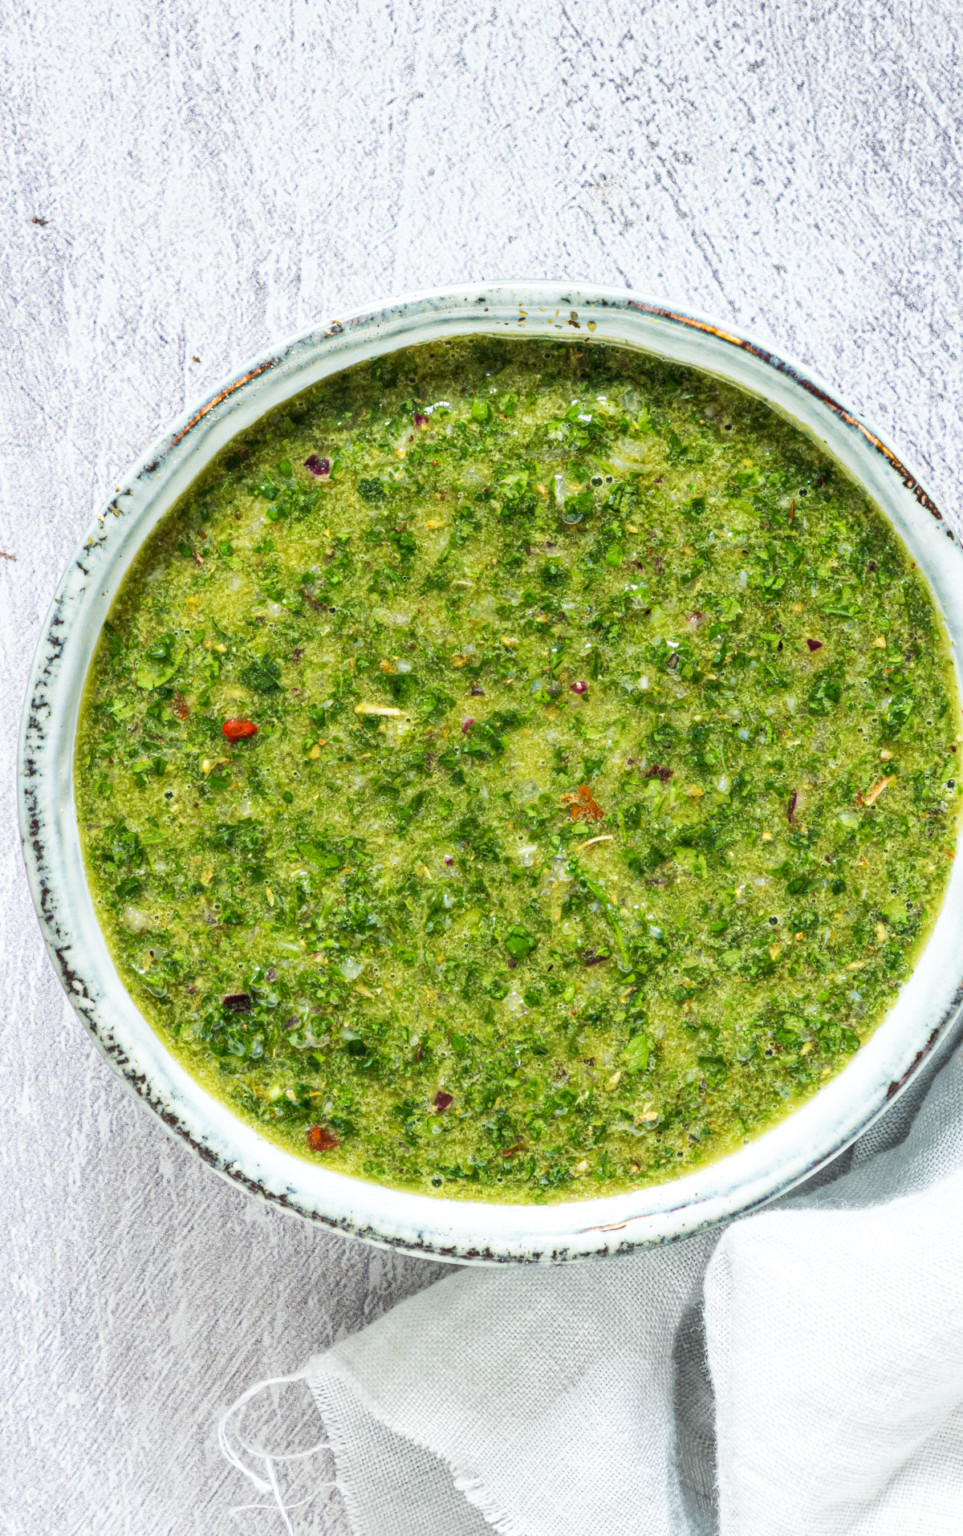 How to Make Chimichurri Recipe | Recipes From A Pantry